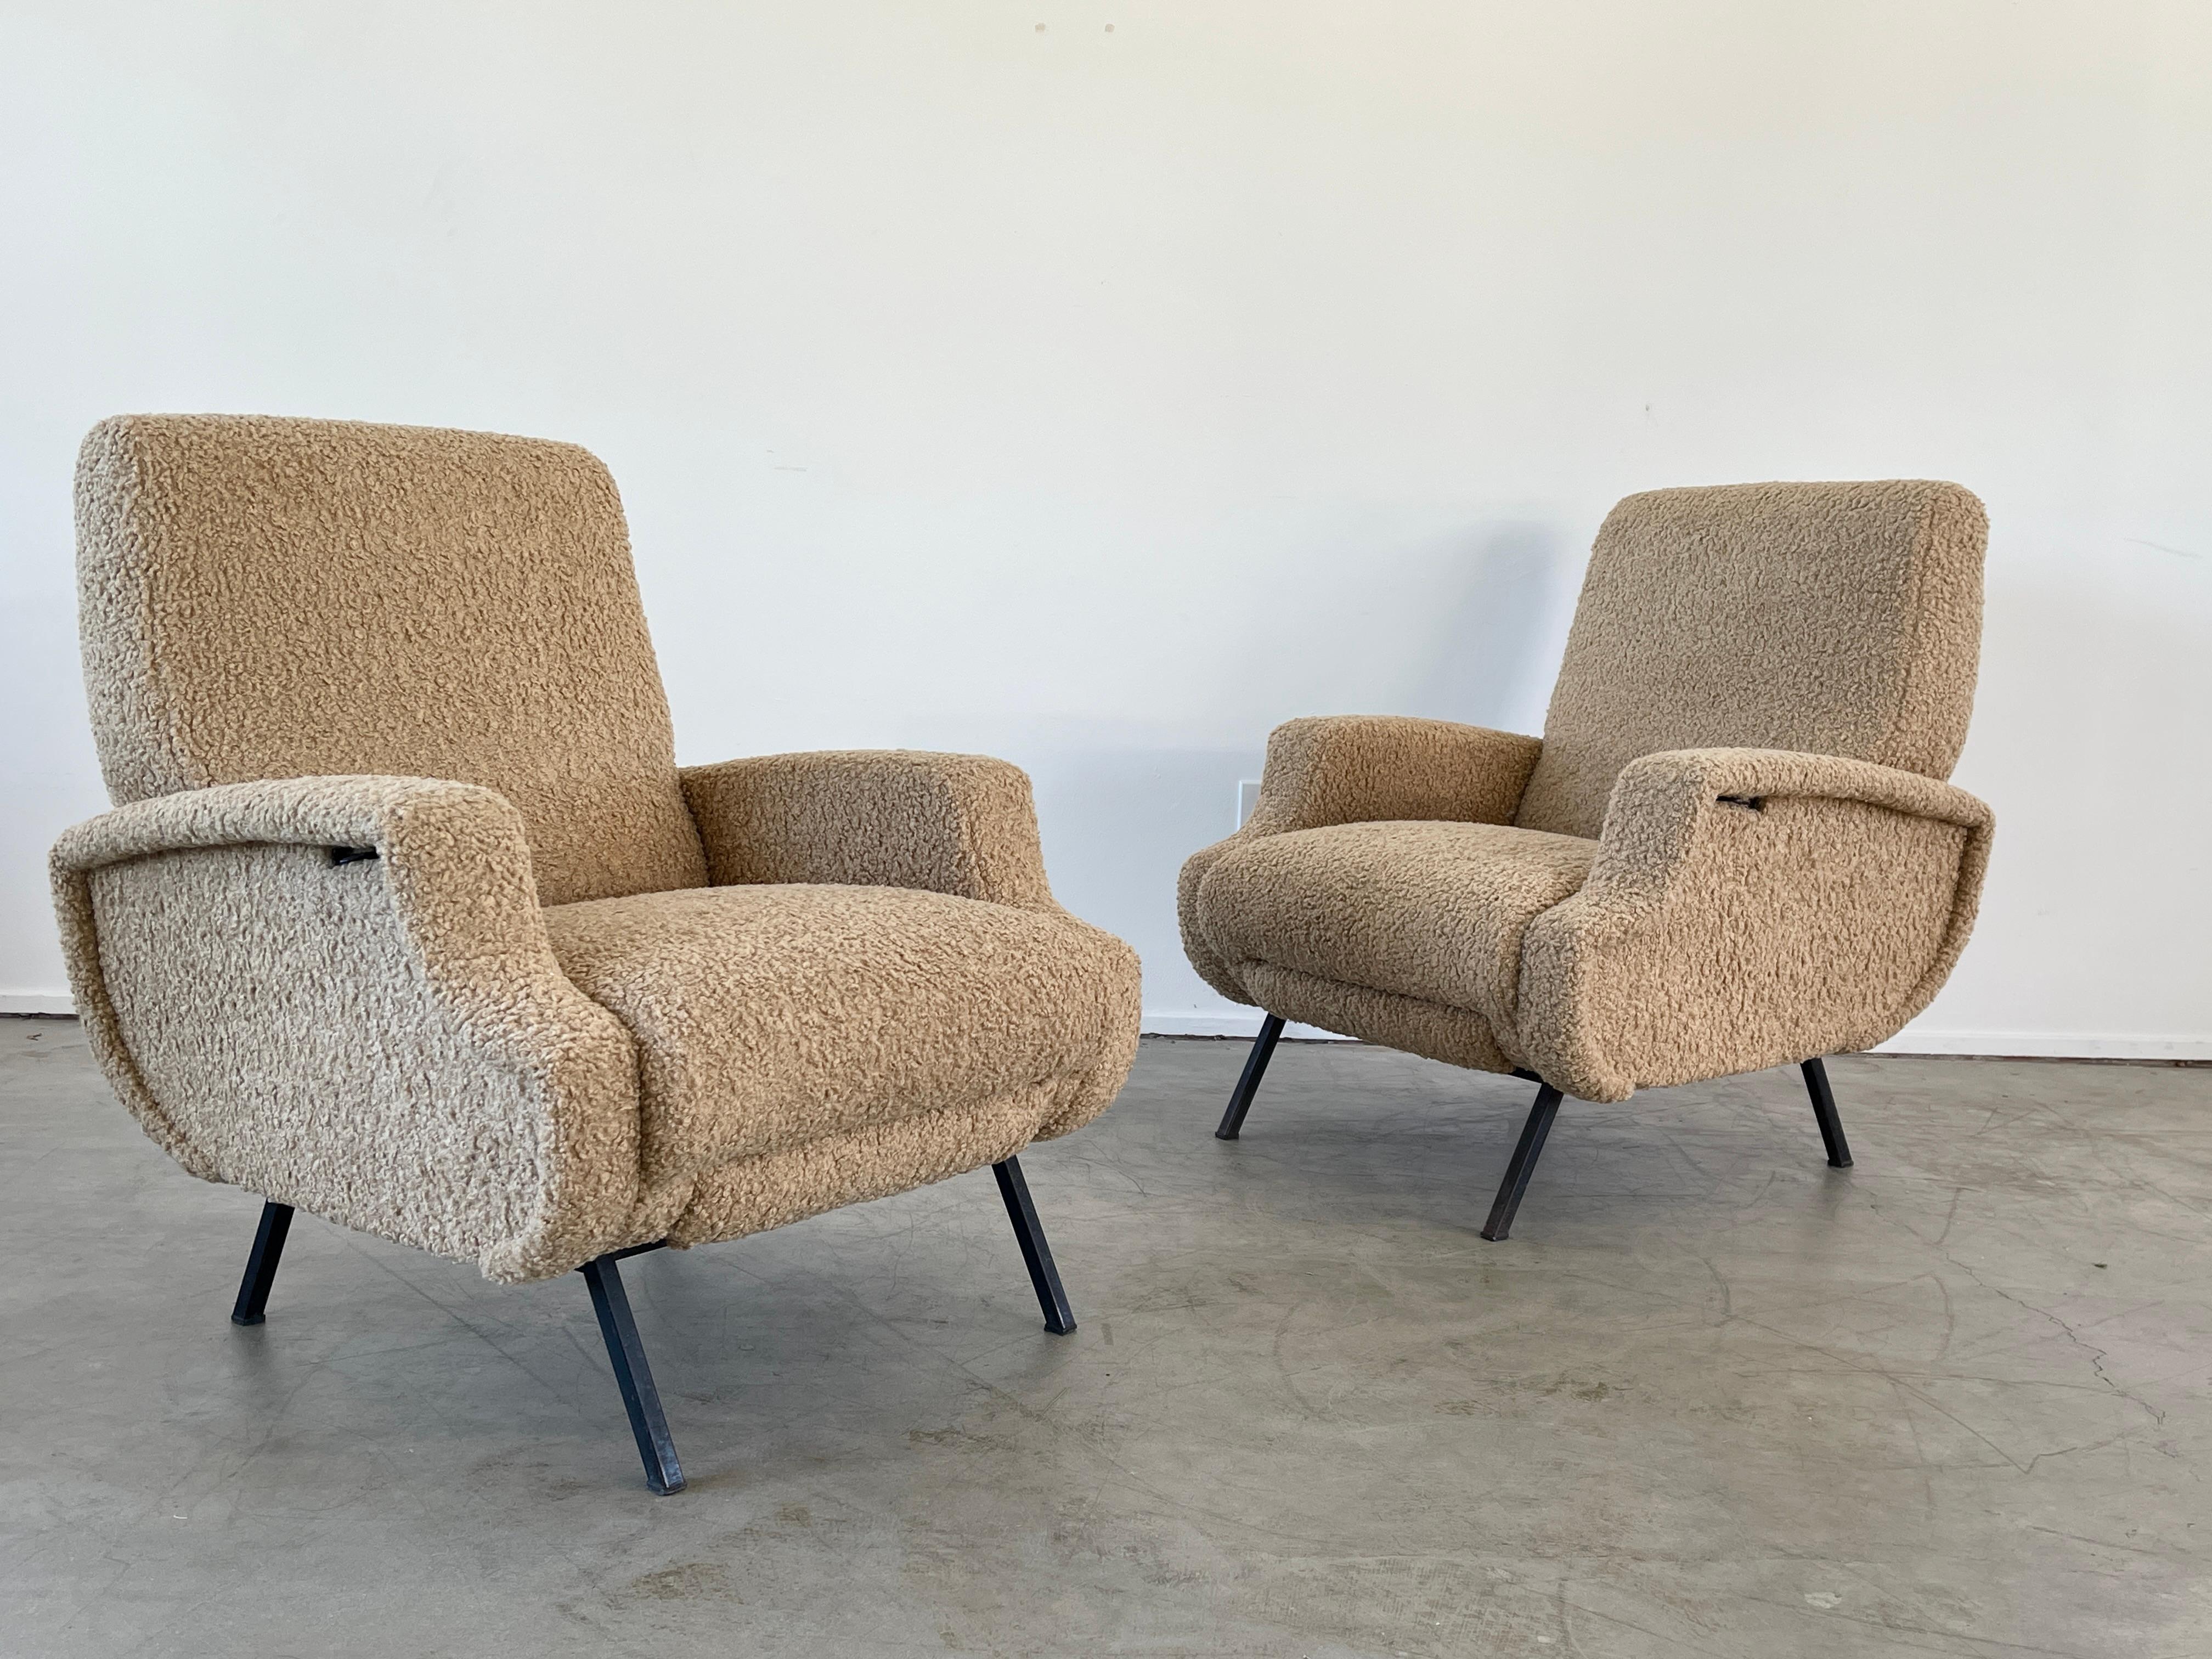 Wonderful pair of Reclining Italian lounge chairs with iron base and reupholstered in camel wool boucle. 

Unique design has mechanism to allow back seat to recline in multiple degrees as well as a pull out foot rest. 

Great for a media room!